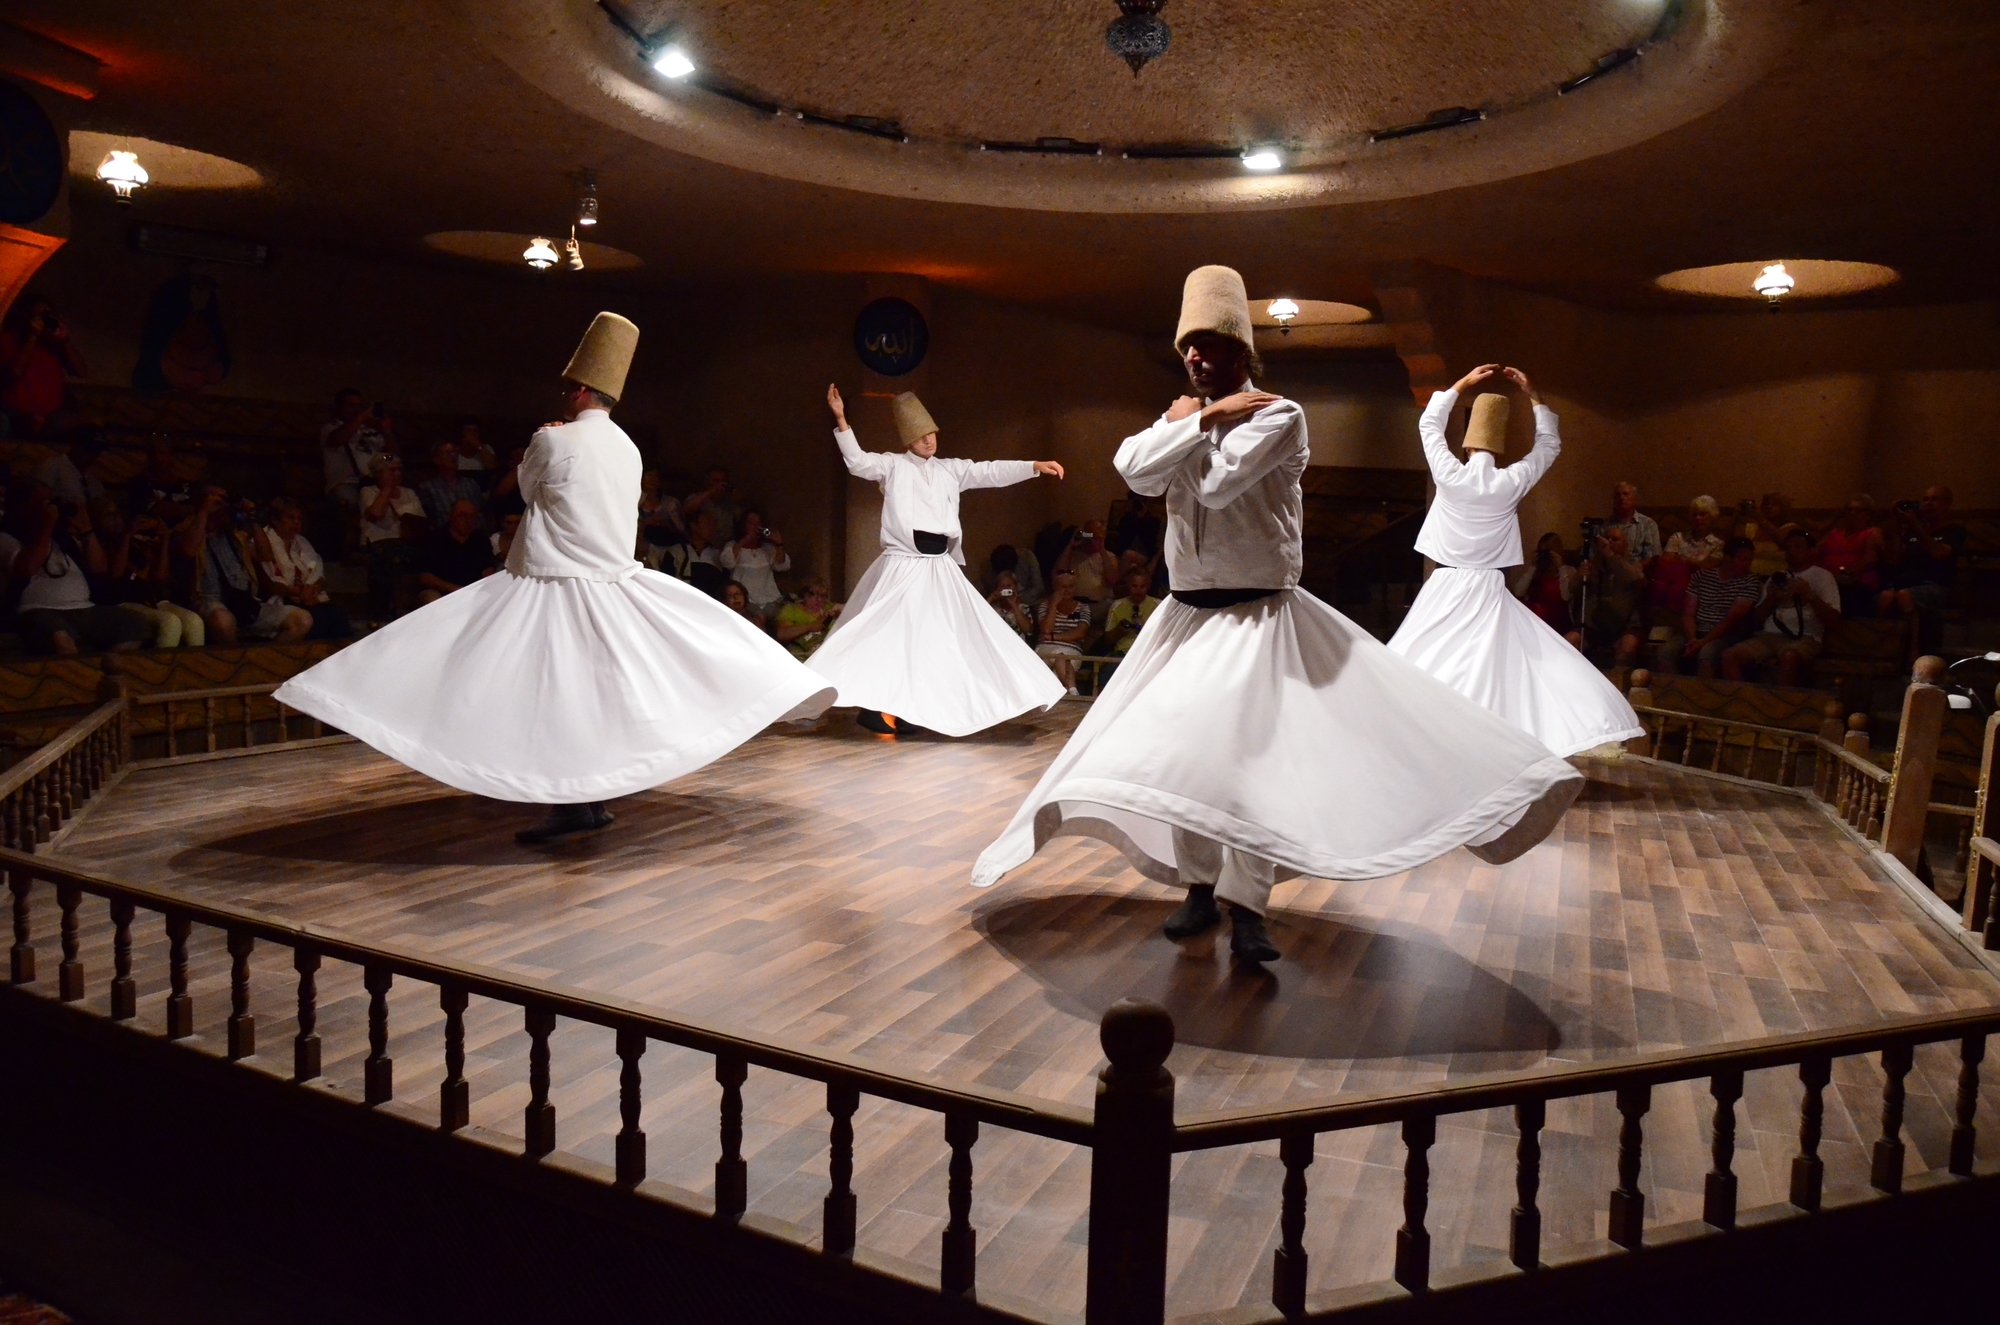 Even After 800 years, Great Sufi Master and Poet, Rumi, Makes Big News